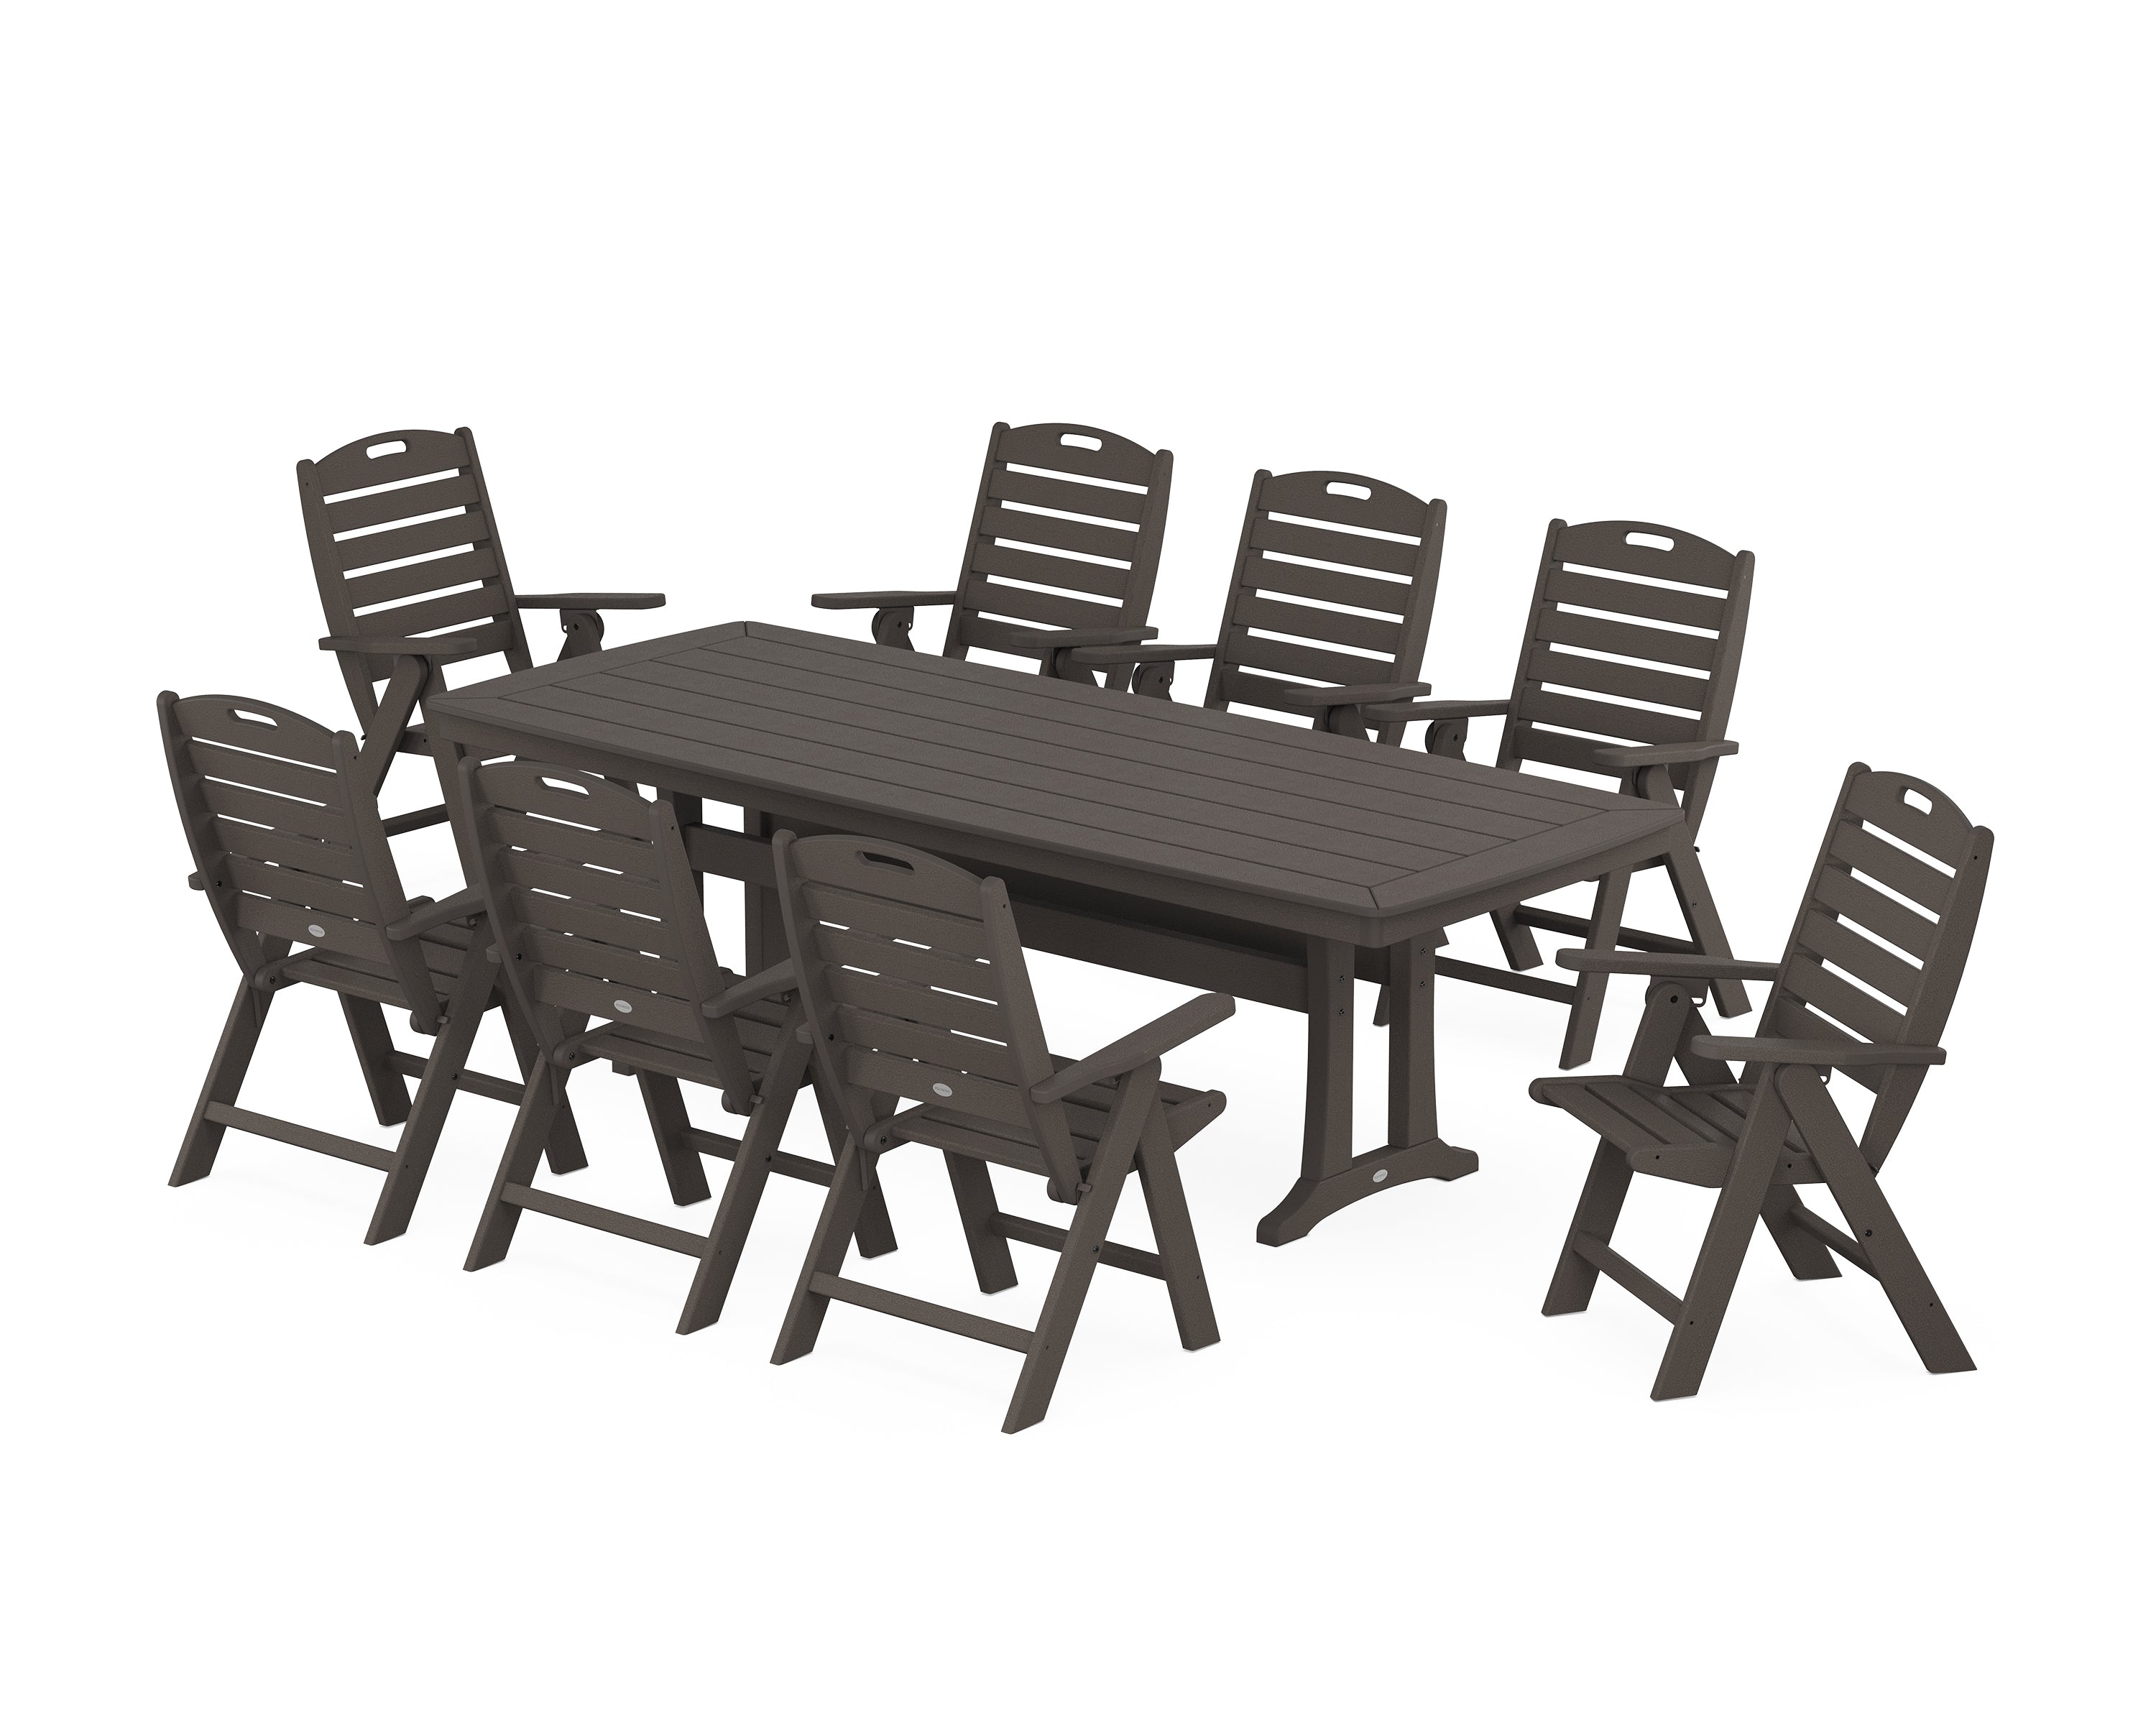 POLYWOOD® Nautical Highback 9-Piece Dining Set with Trestle Legs in Vintage Coffee